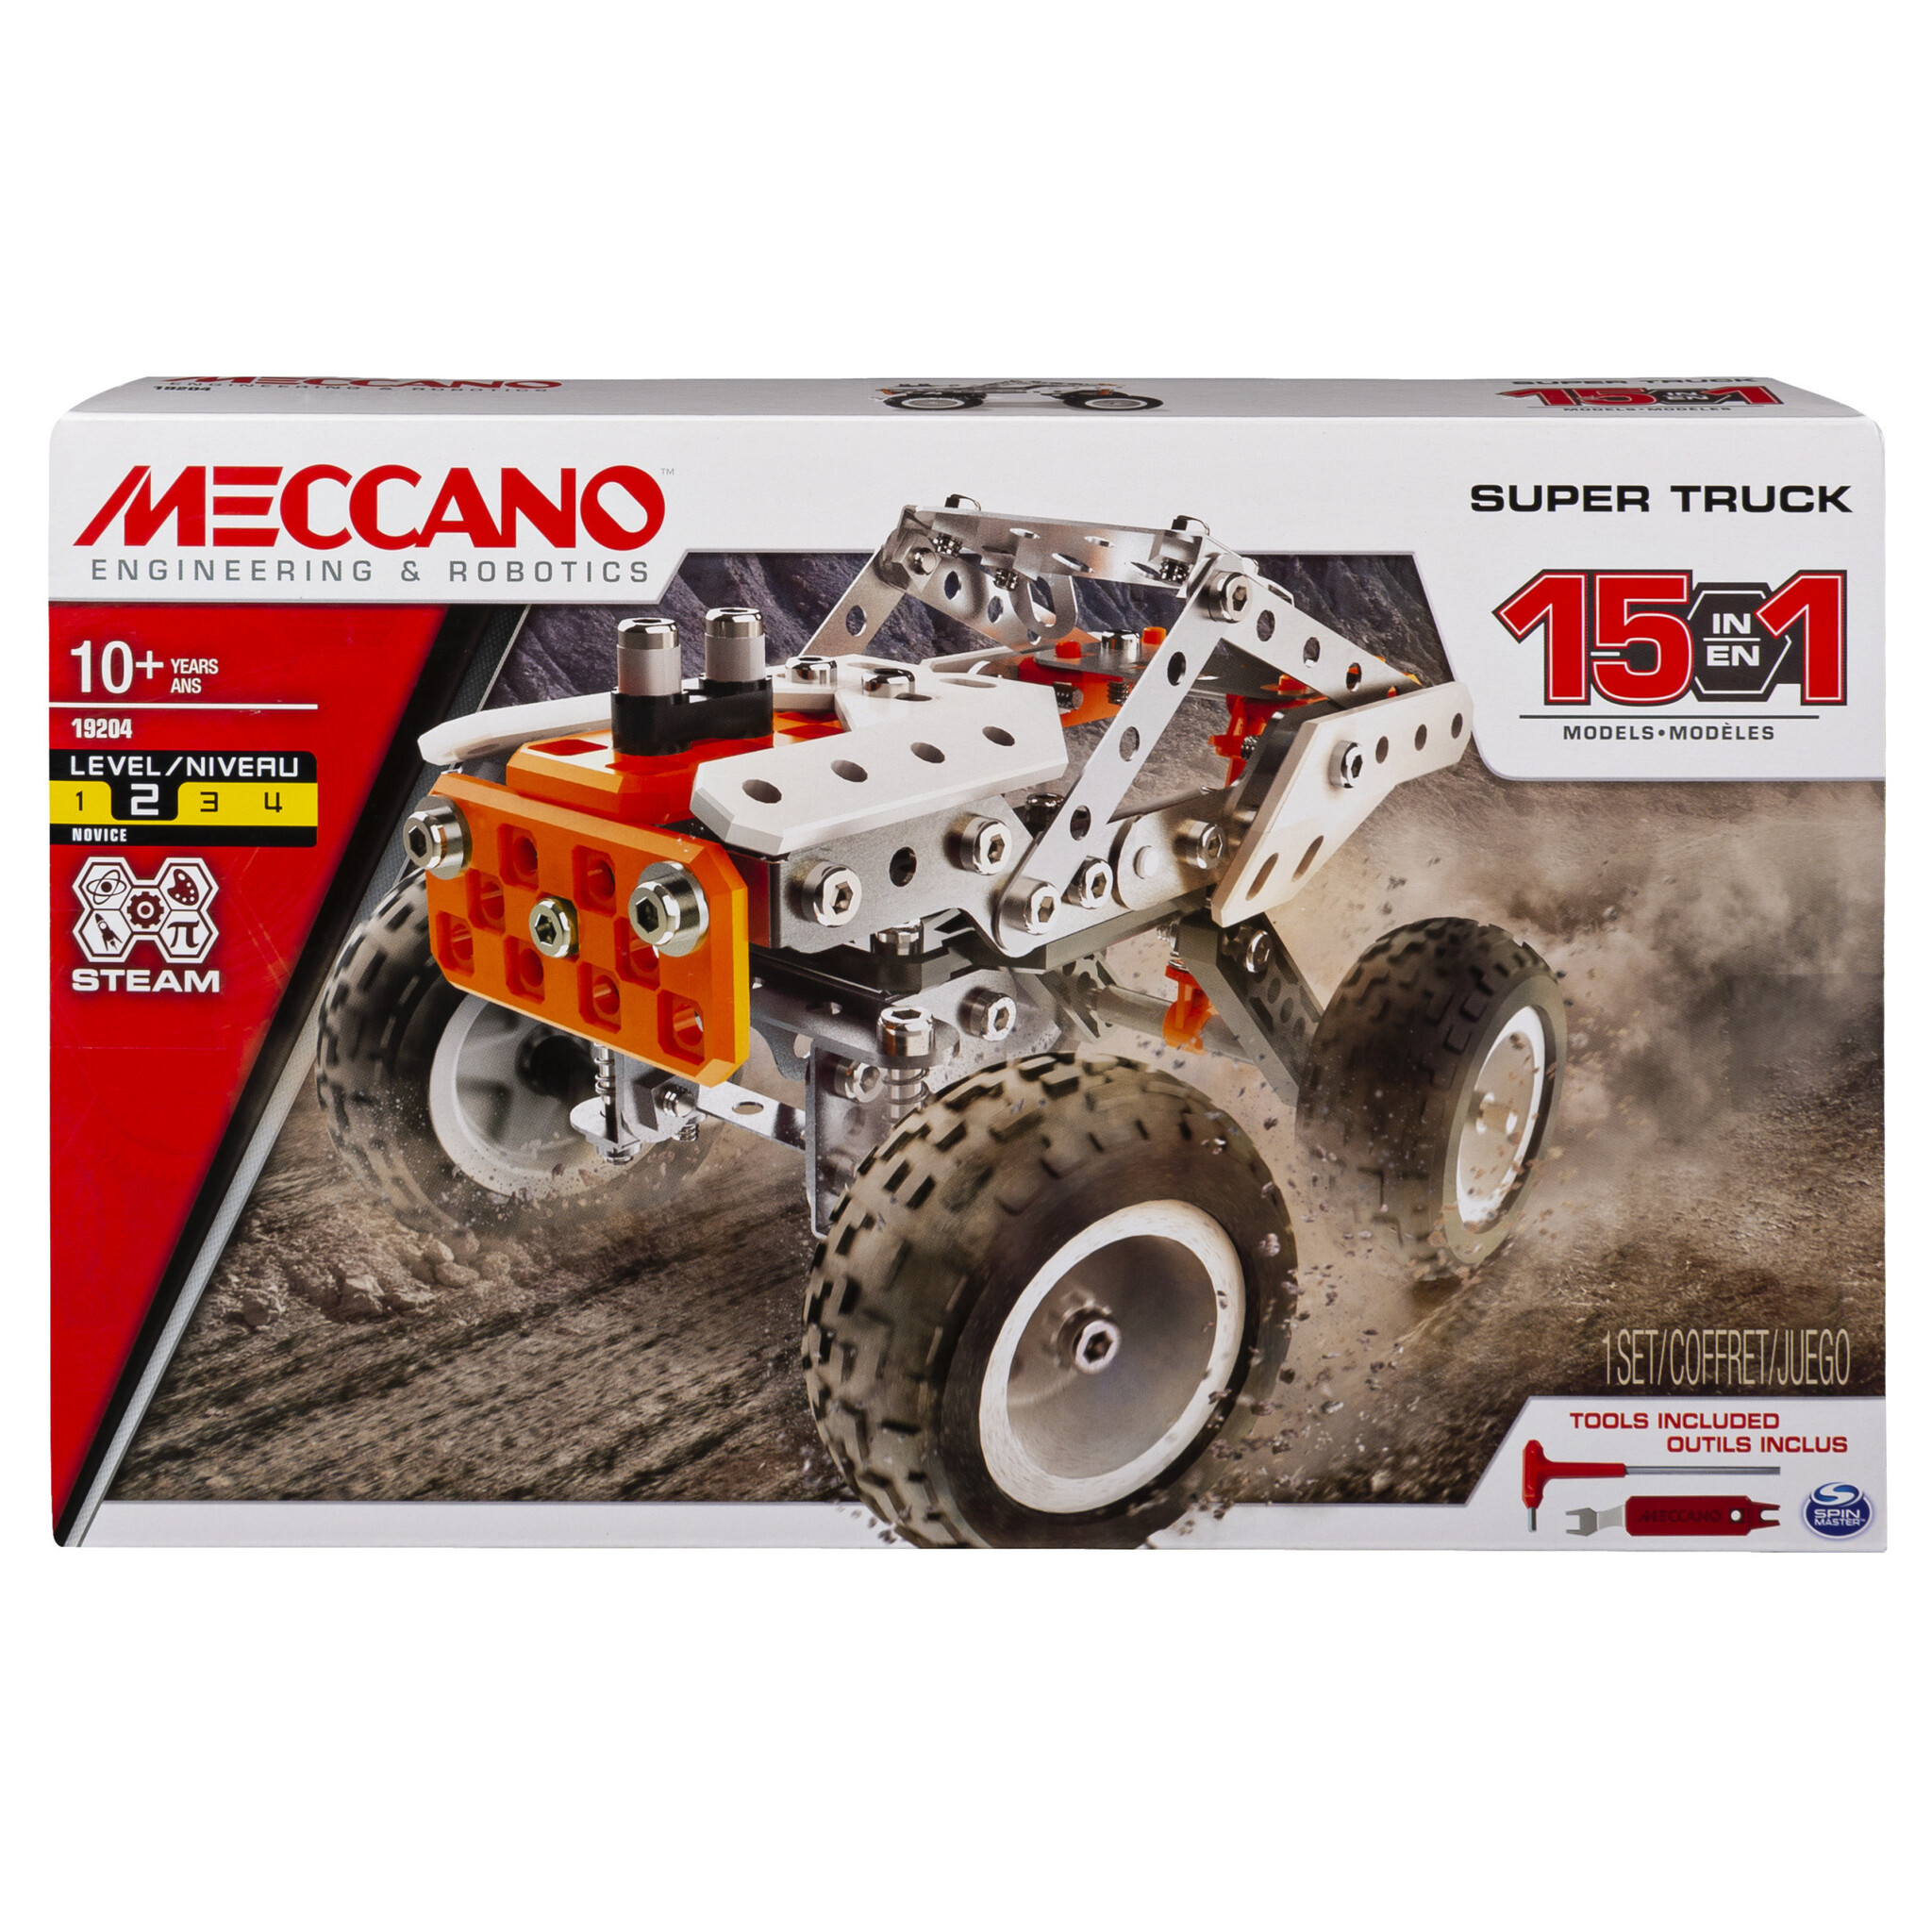 Welcome To Erector By Meccano ® The Original Inventor, 55% OFF